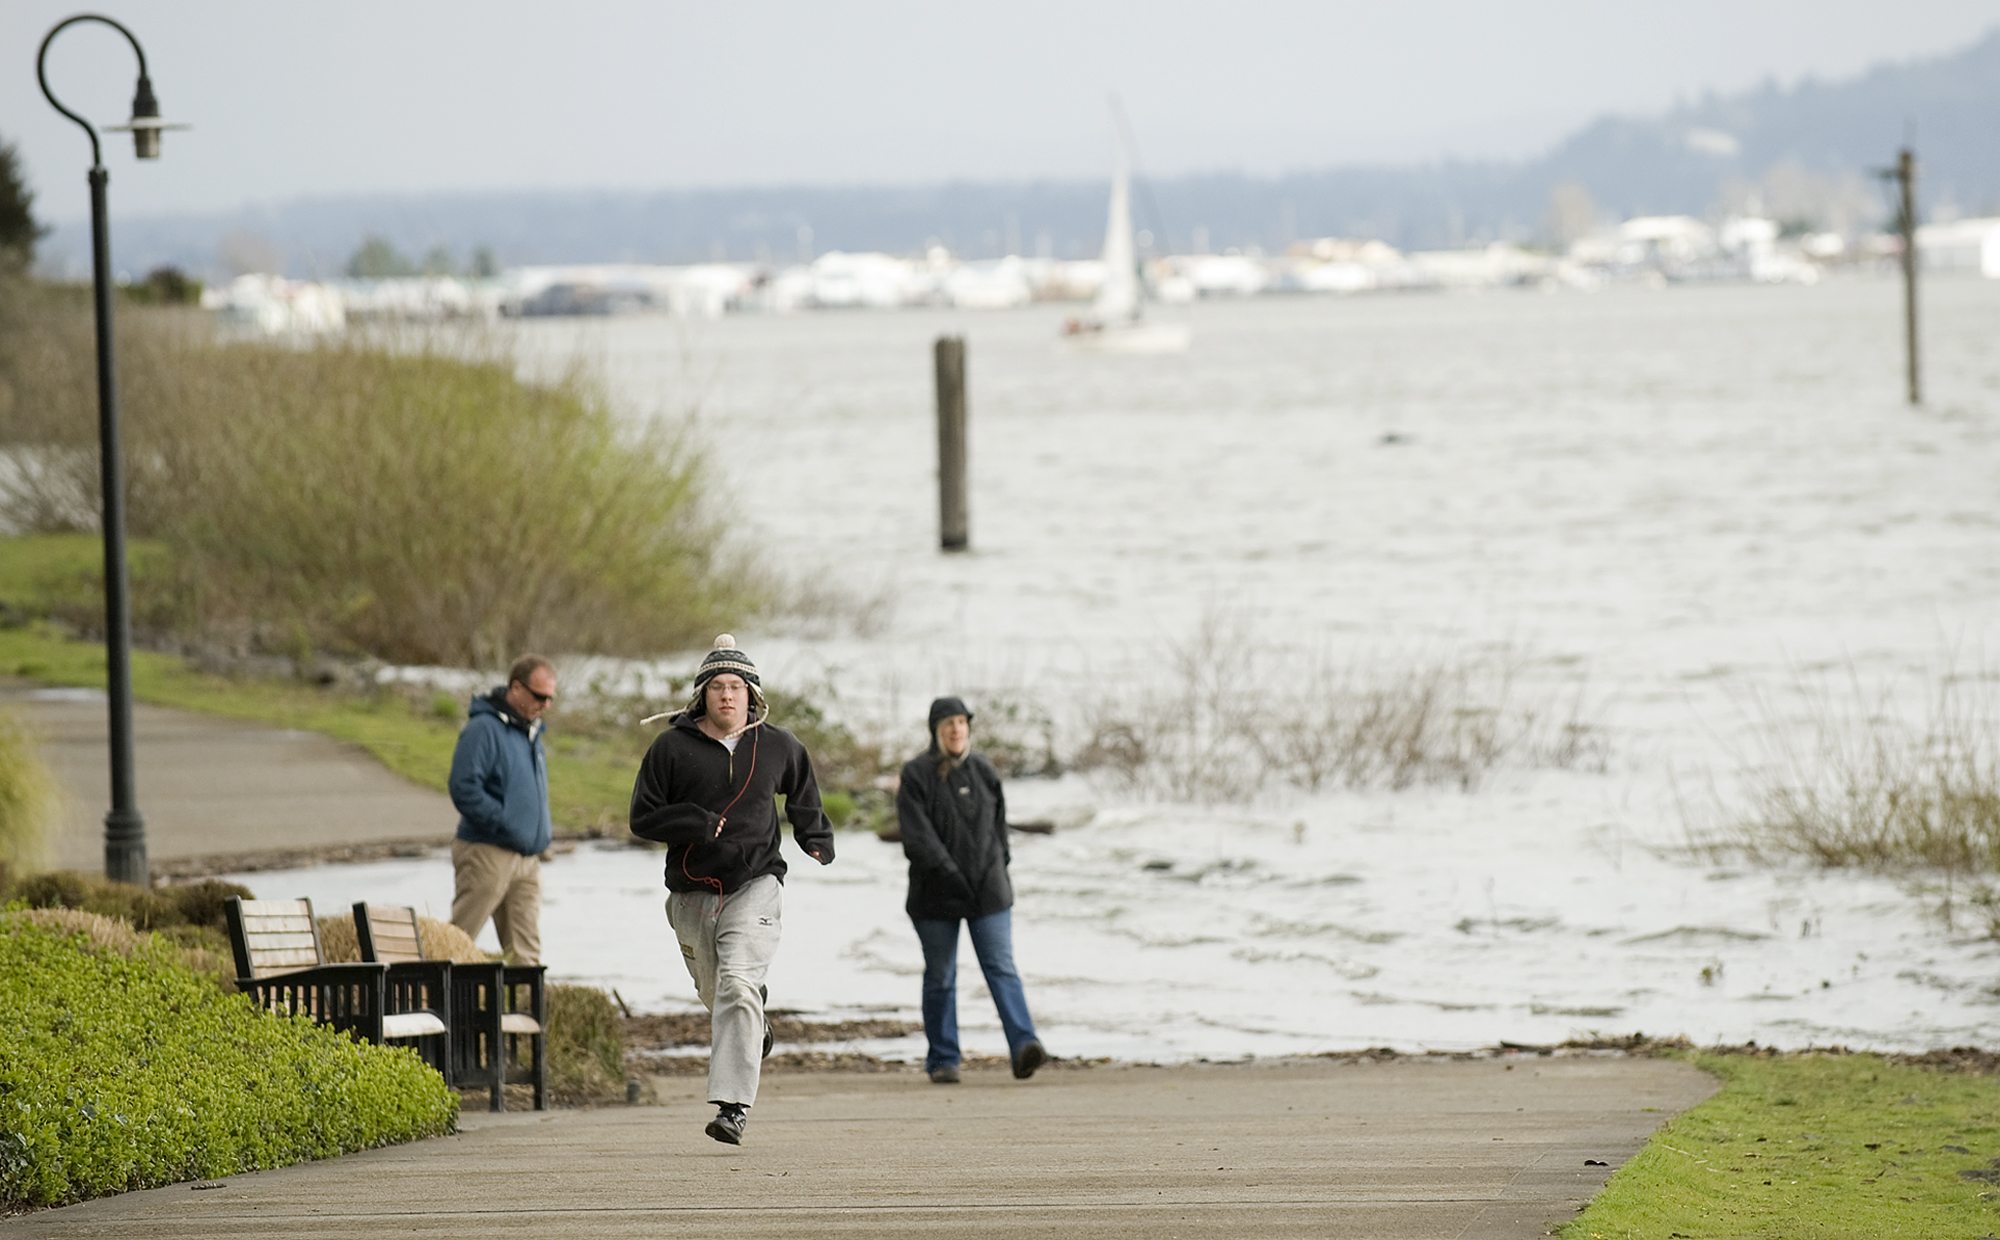 The Columbia River swallows up part of the Waterfront Renaissance Trail as Dave Altman, center, of Vancouver and Greg and Cheryl Fewins of Puyallup navigate around the flooded path on Sunday.